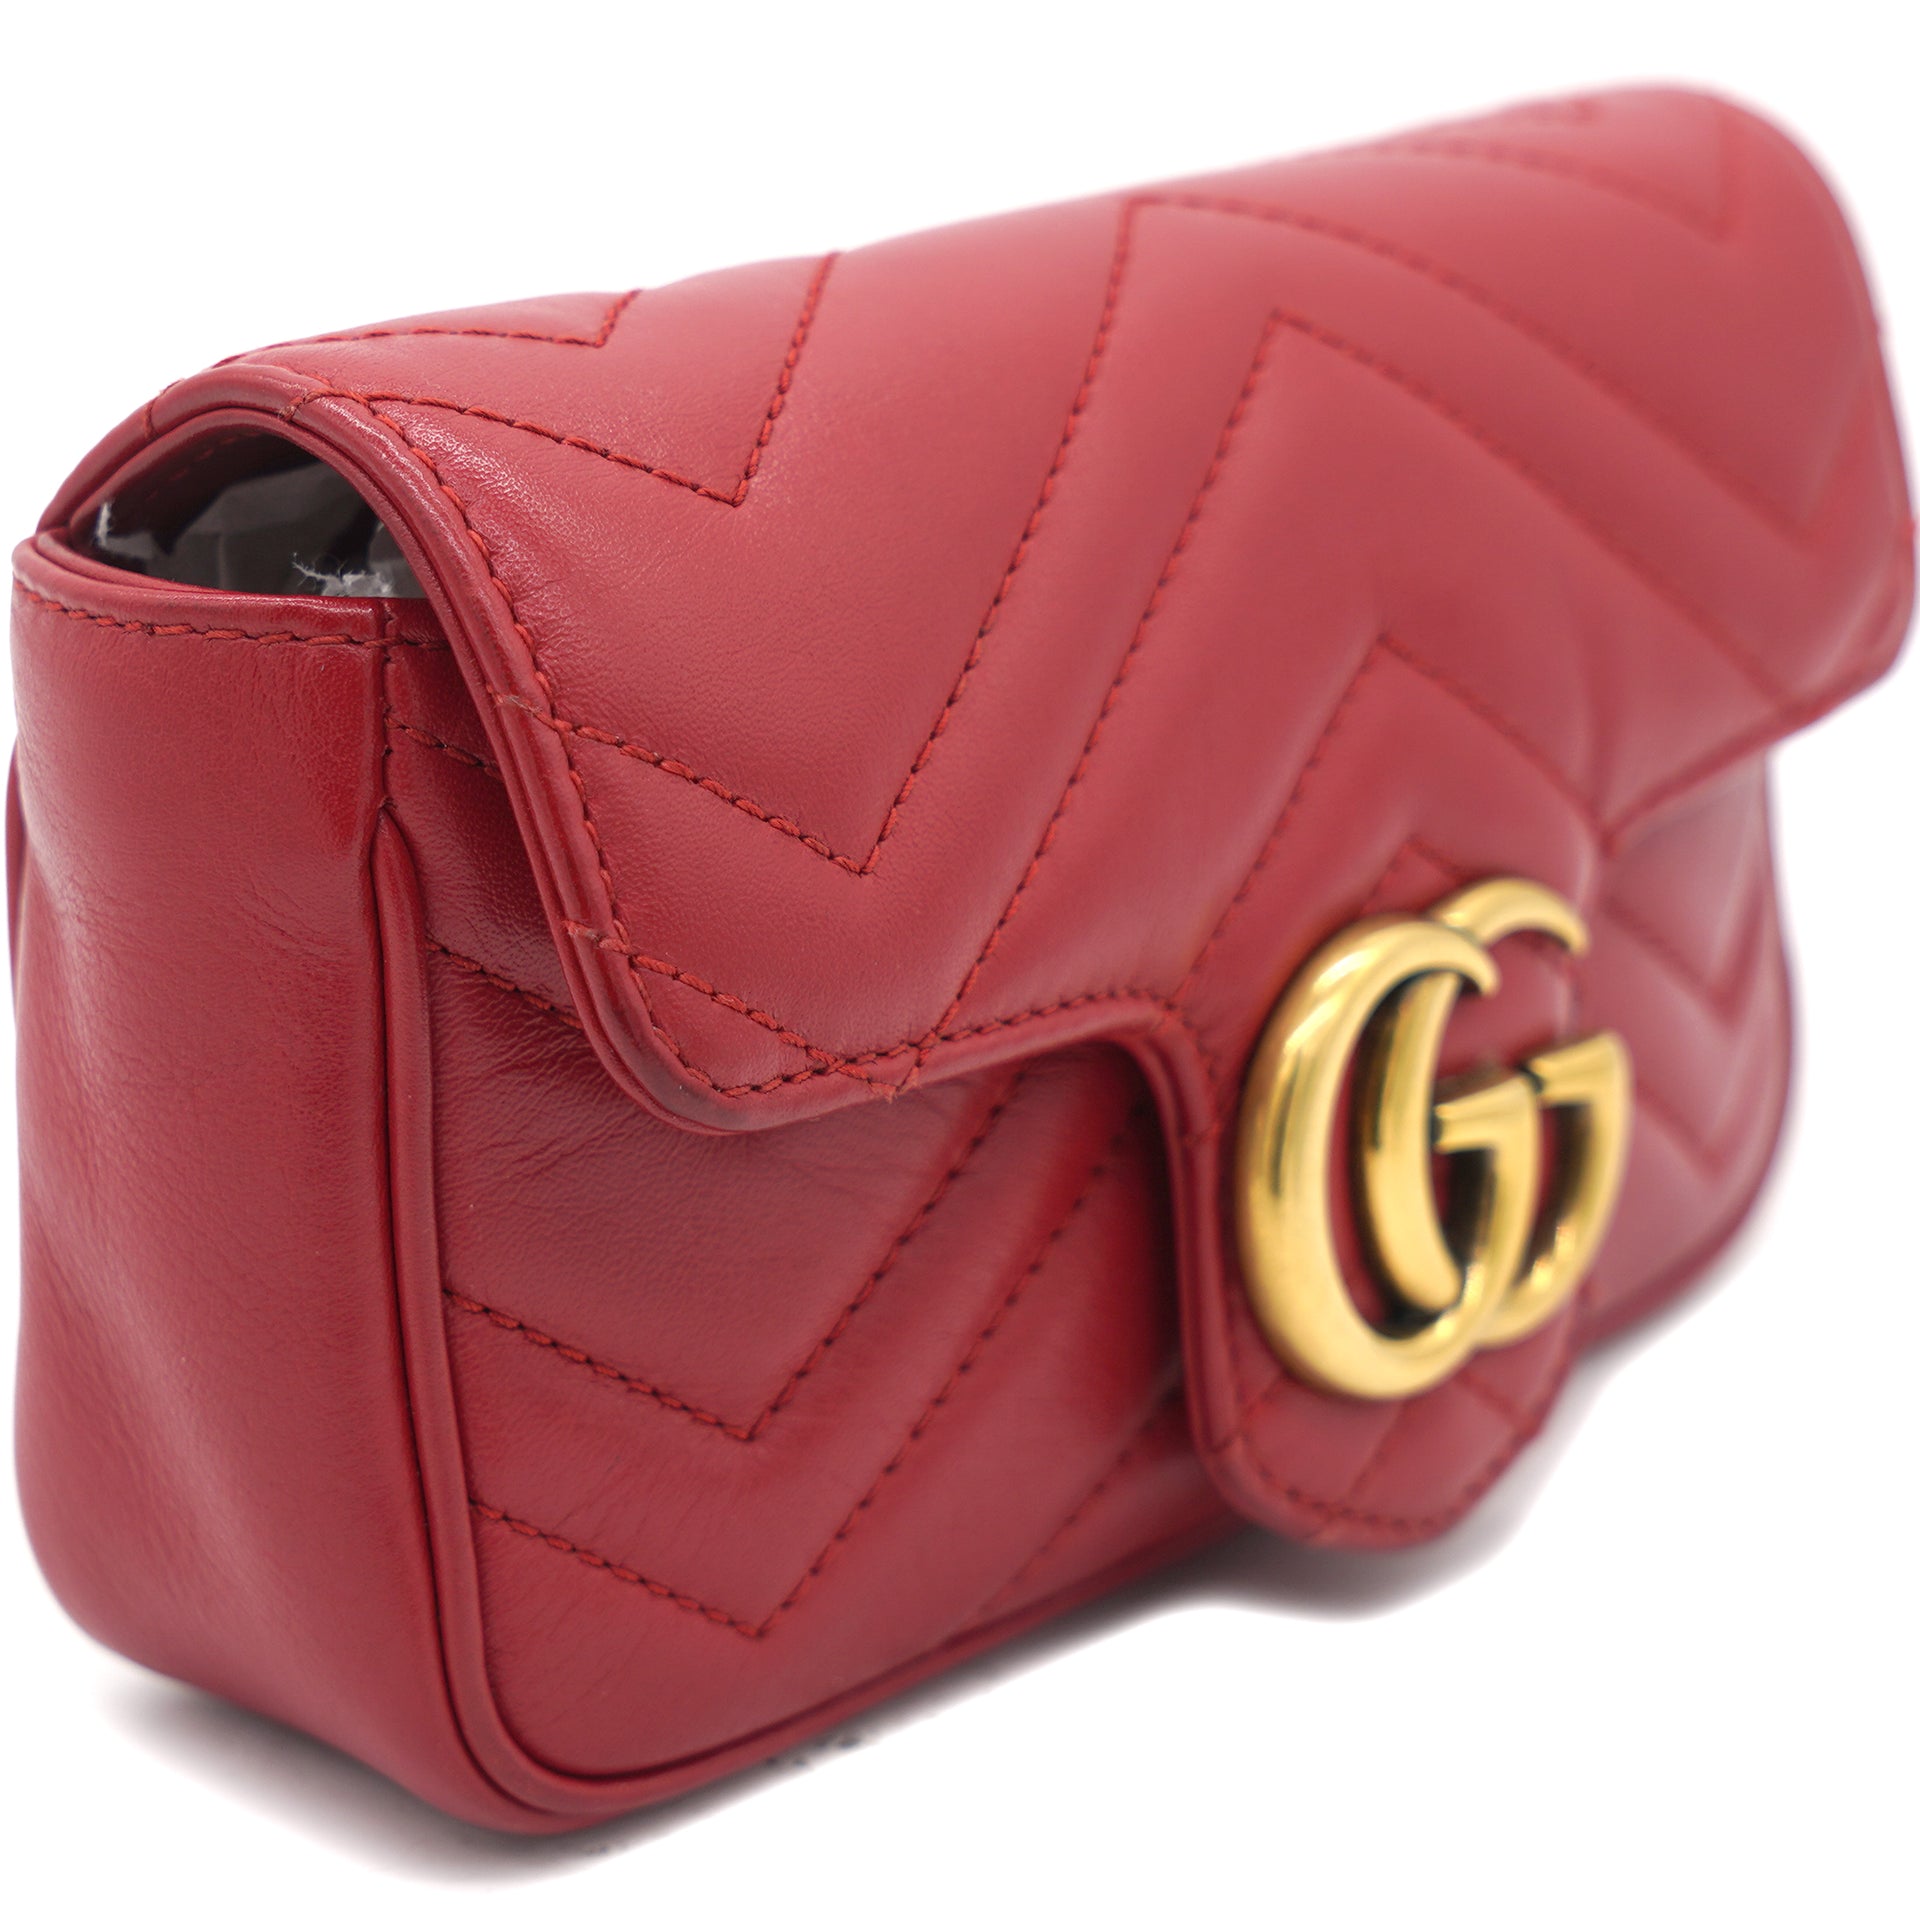 Gucci Gucci Gg Marmont Small Top Handle Bag In Black Leather on SALE